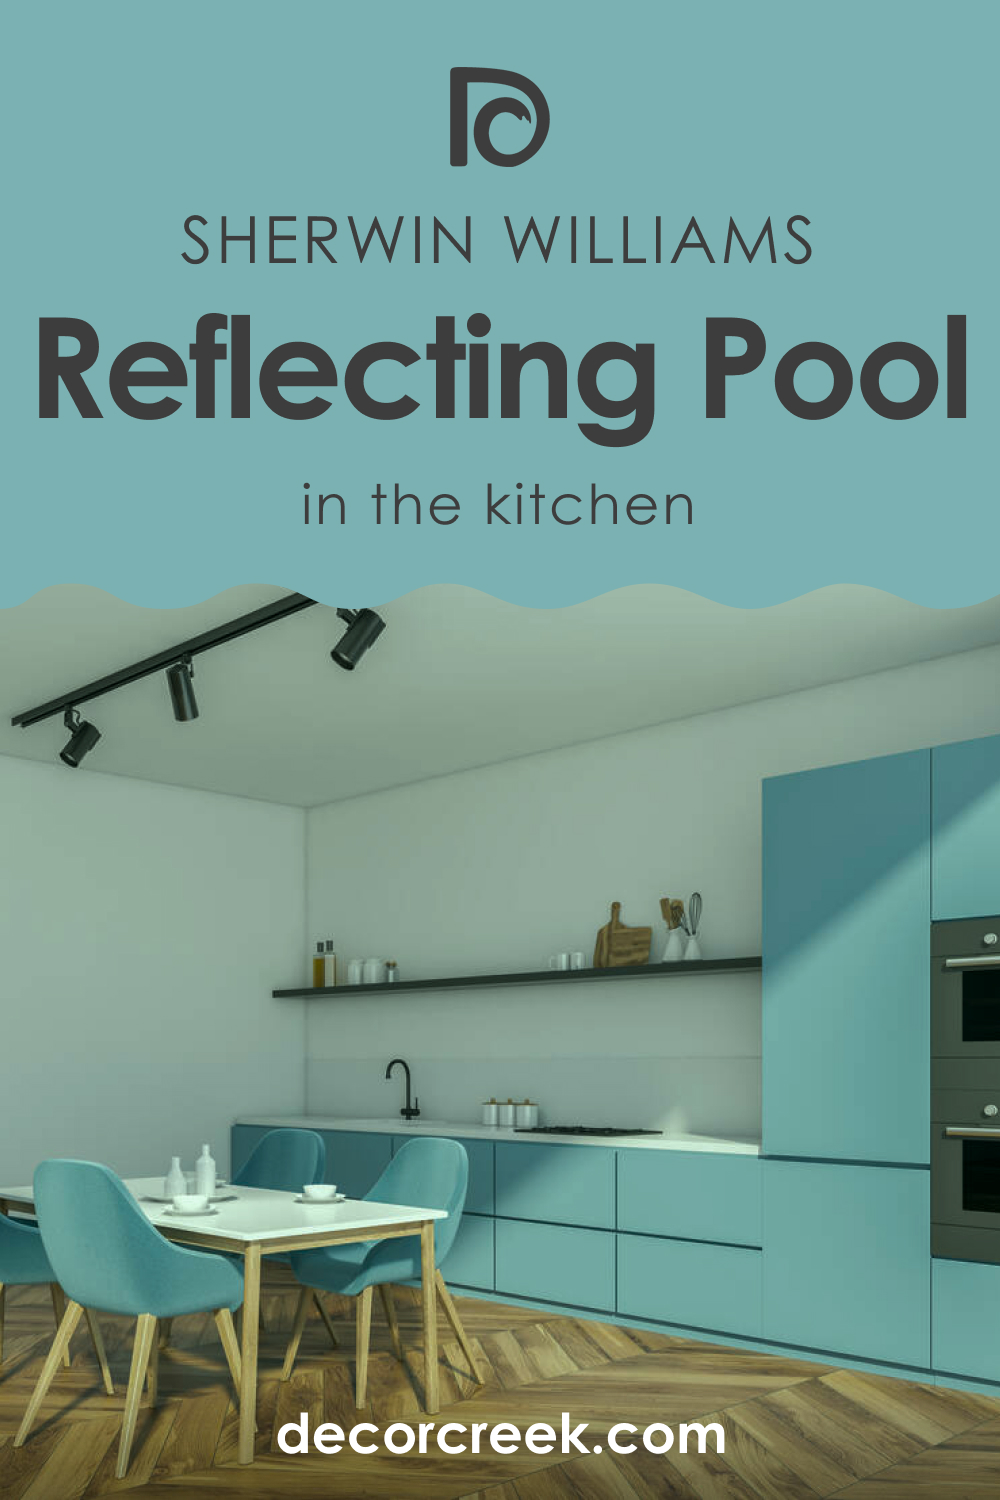 How to Use SW 6486 Reflecting Pool for the Kitchen?